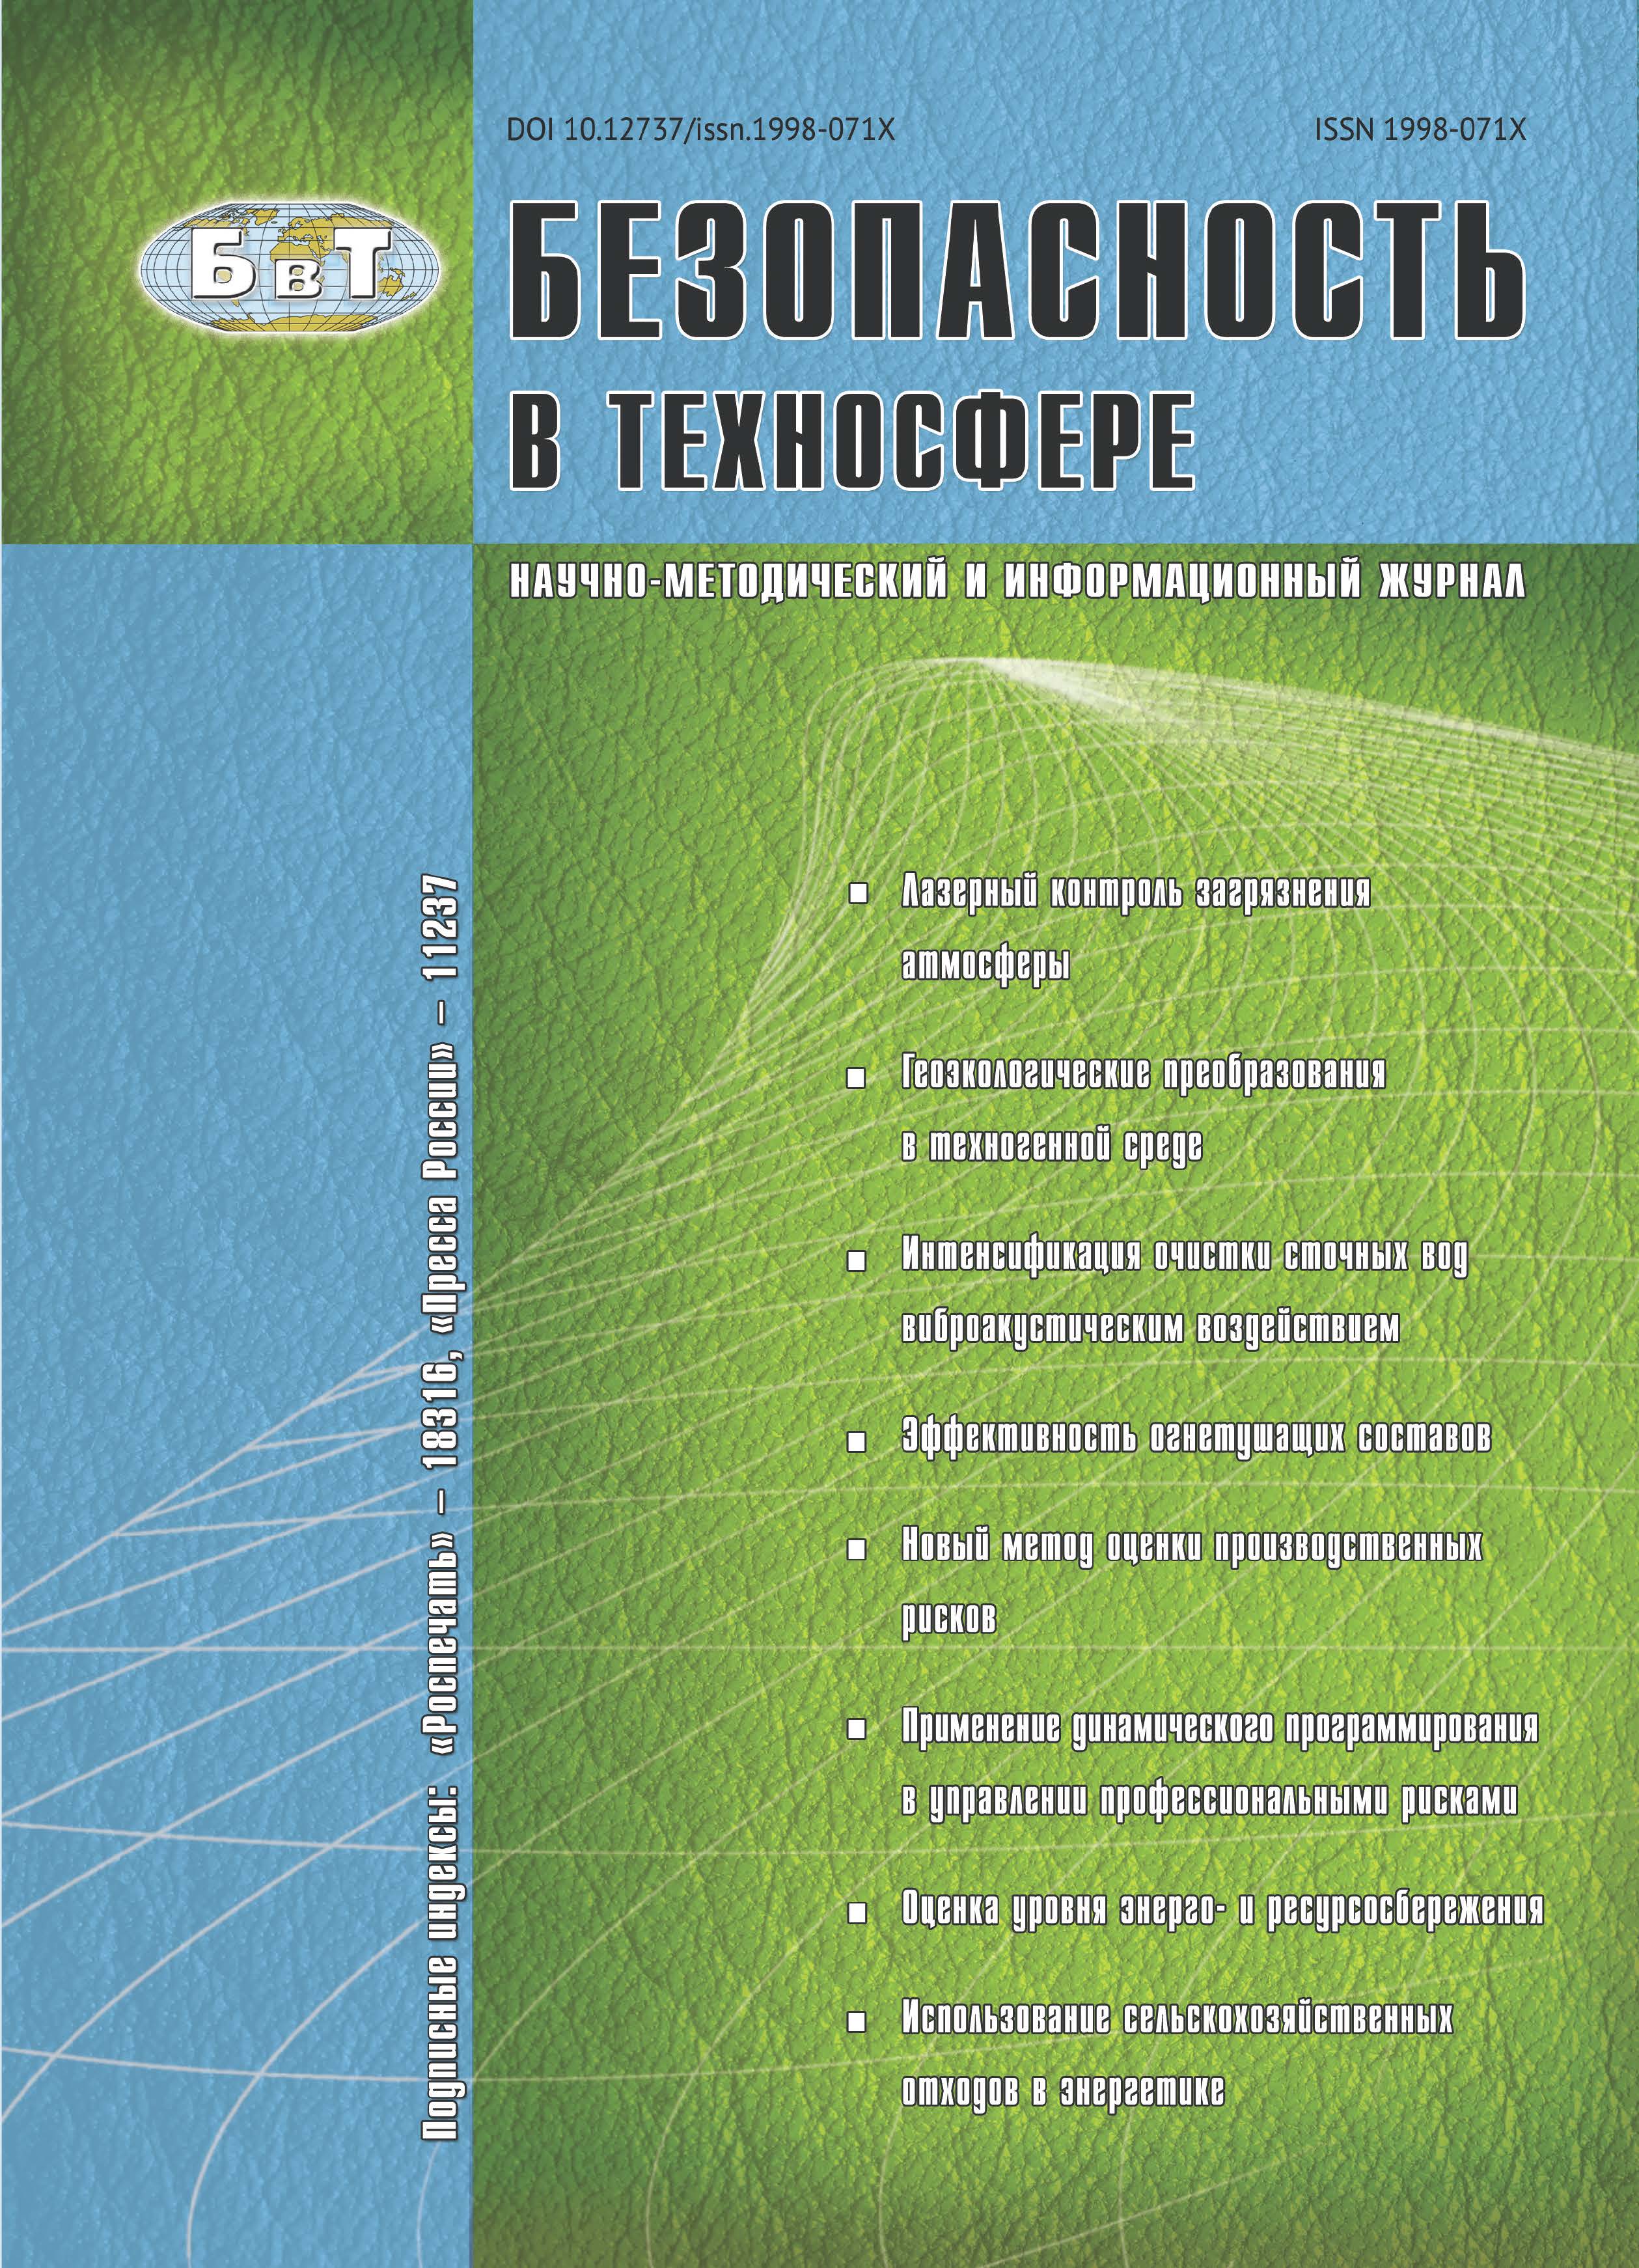                         Ratings of Russian Academic Periodicals Specializing on Problems of Safety, Environment Protection and Ecology
            